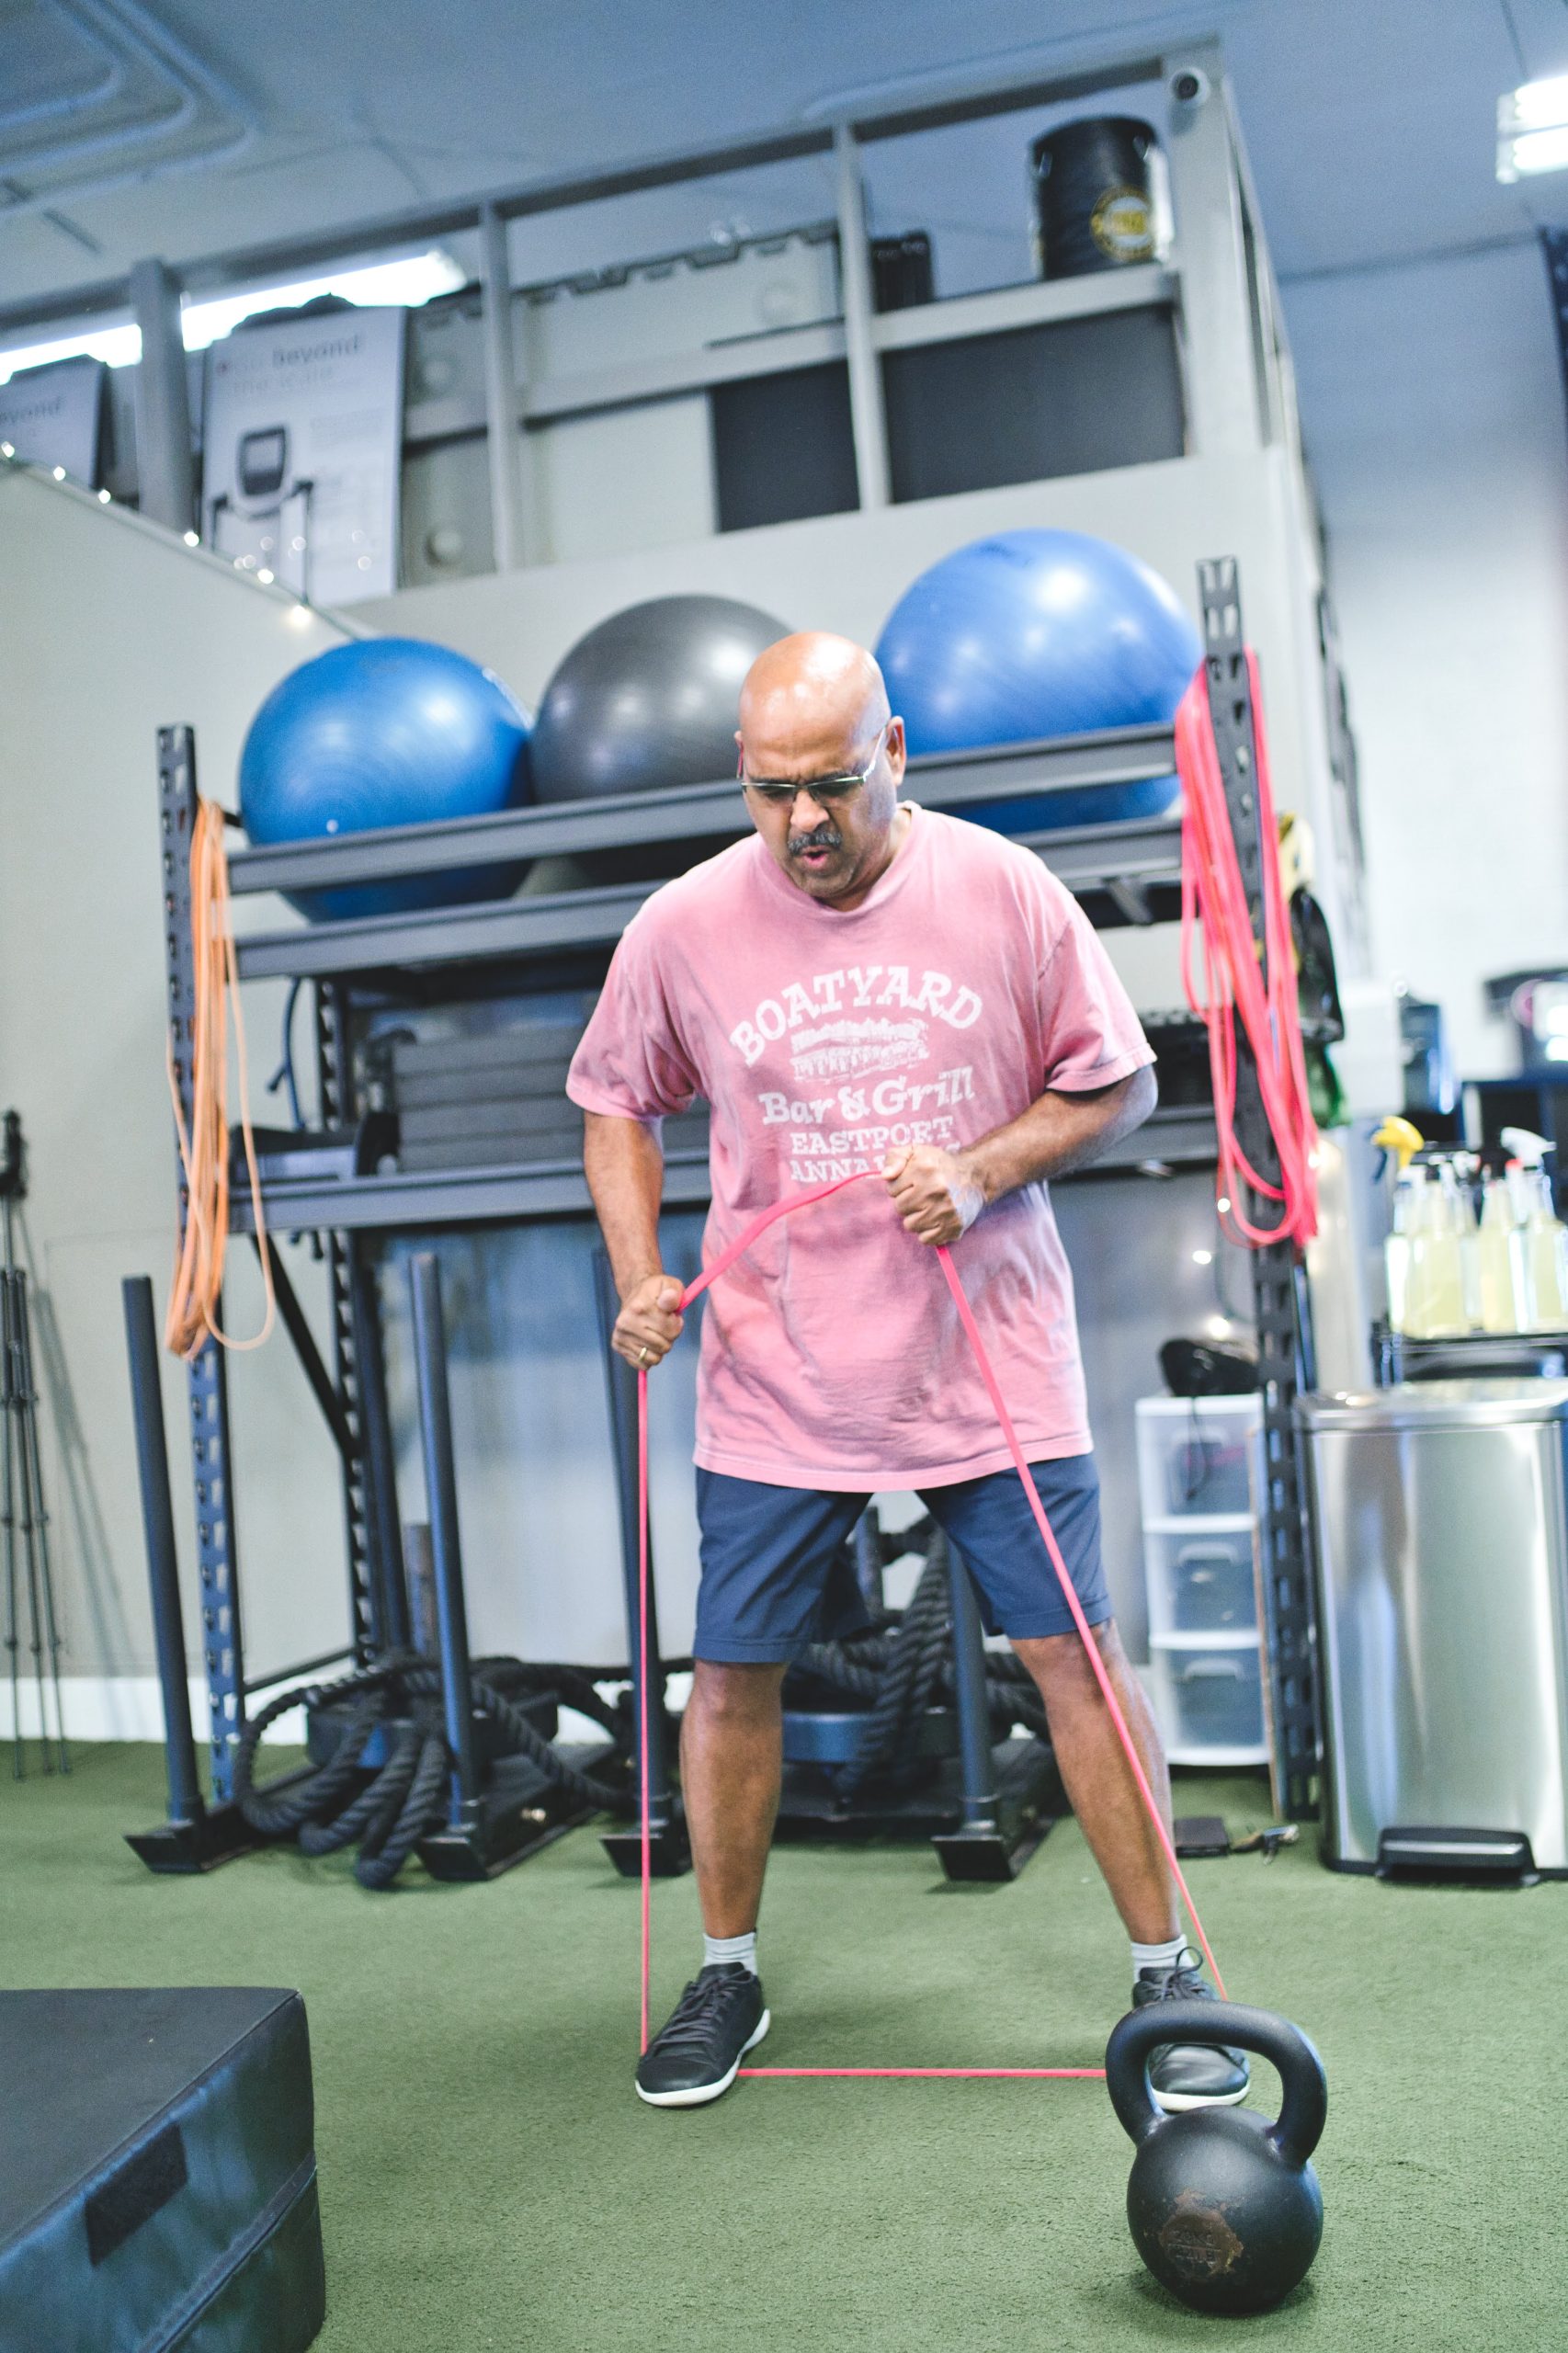 A man working out using resistance bands in a gym.